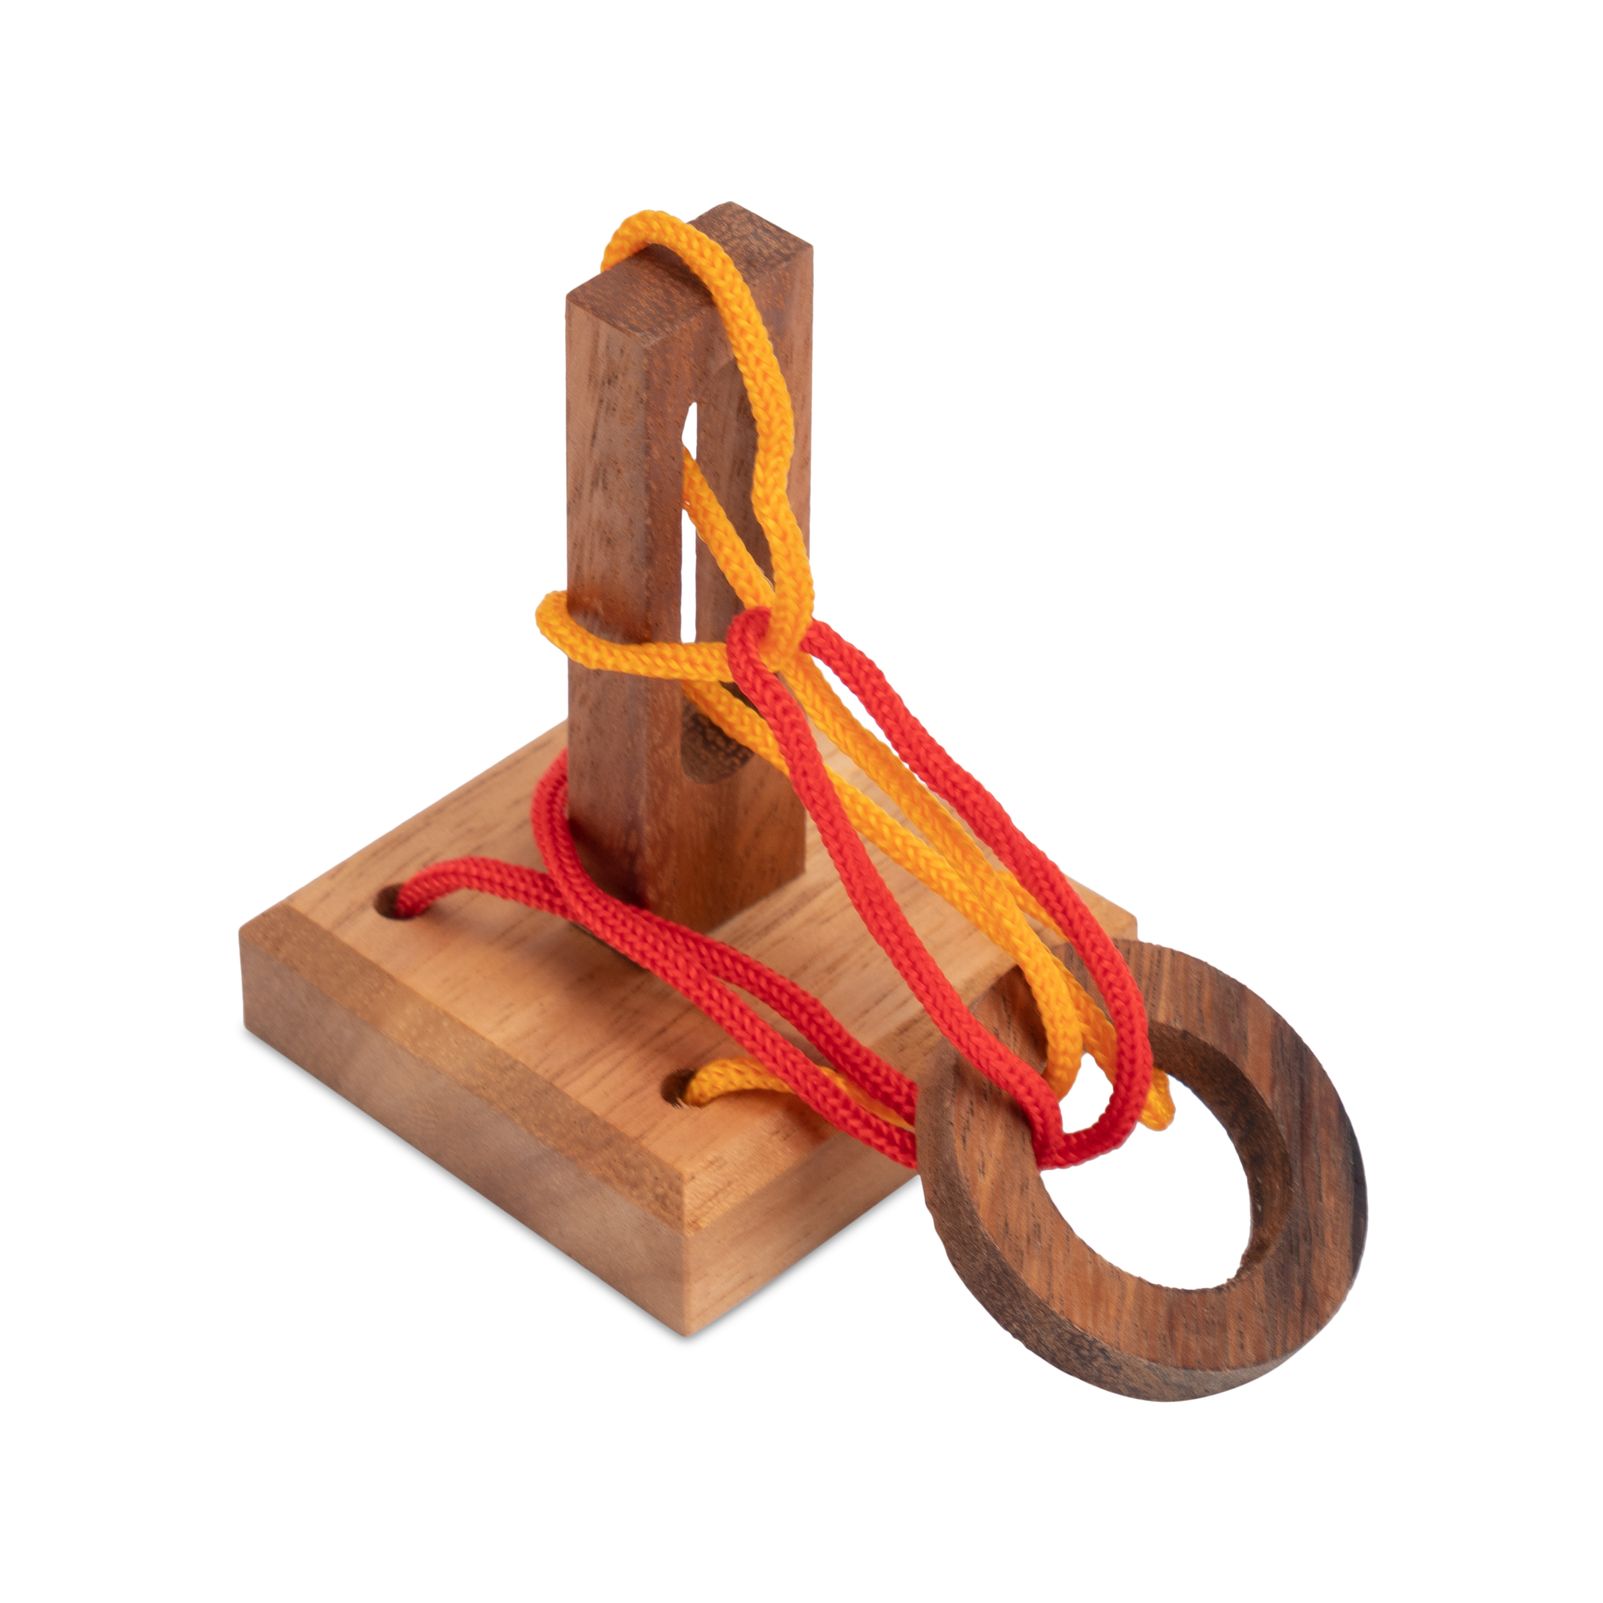 Crazy ring - string puzzle - wooden brainteaser